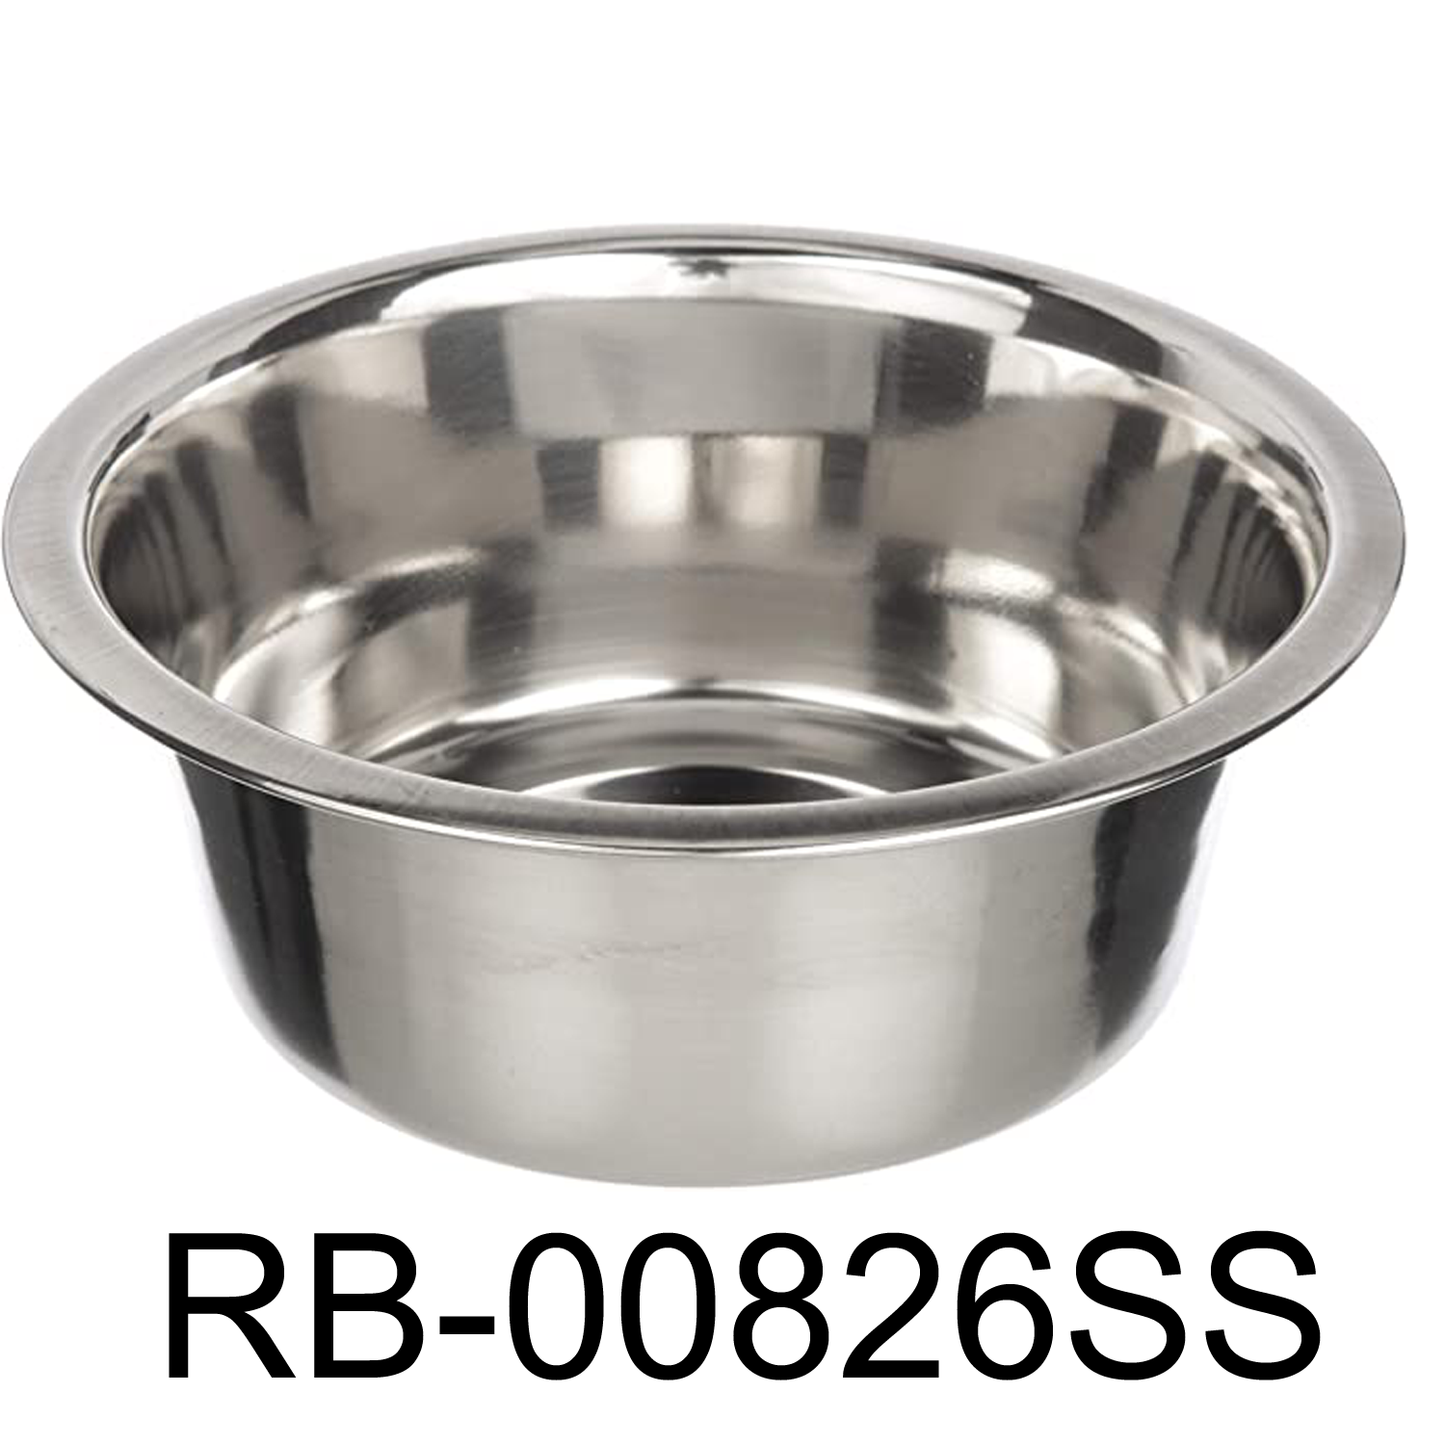 26cm Stainless Steel Basin Mixing Bowl